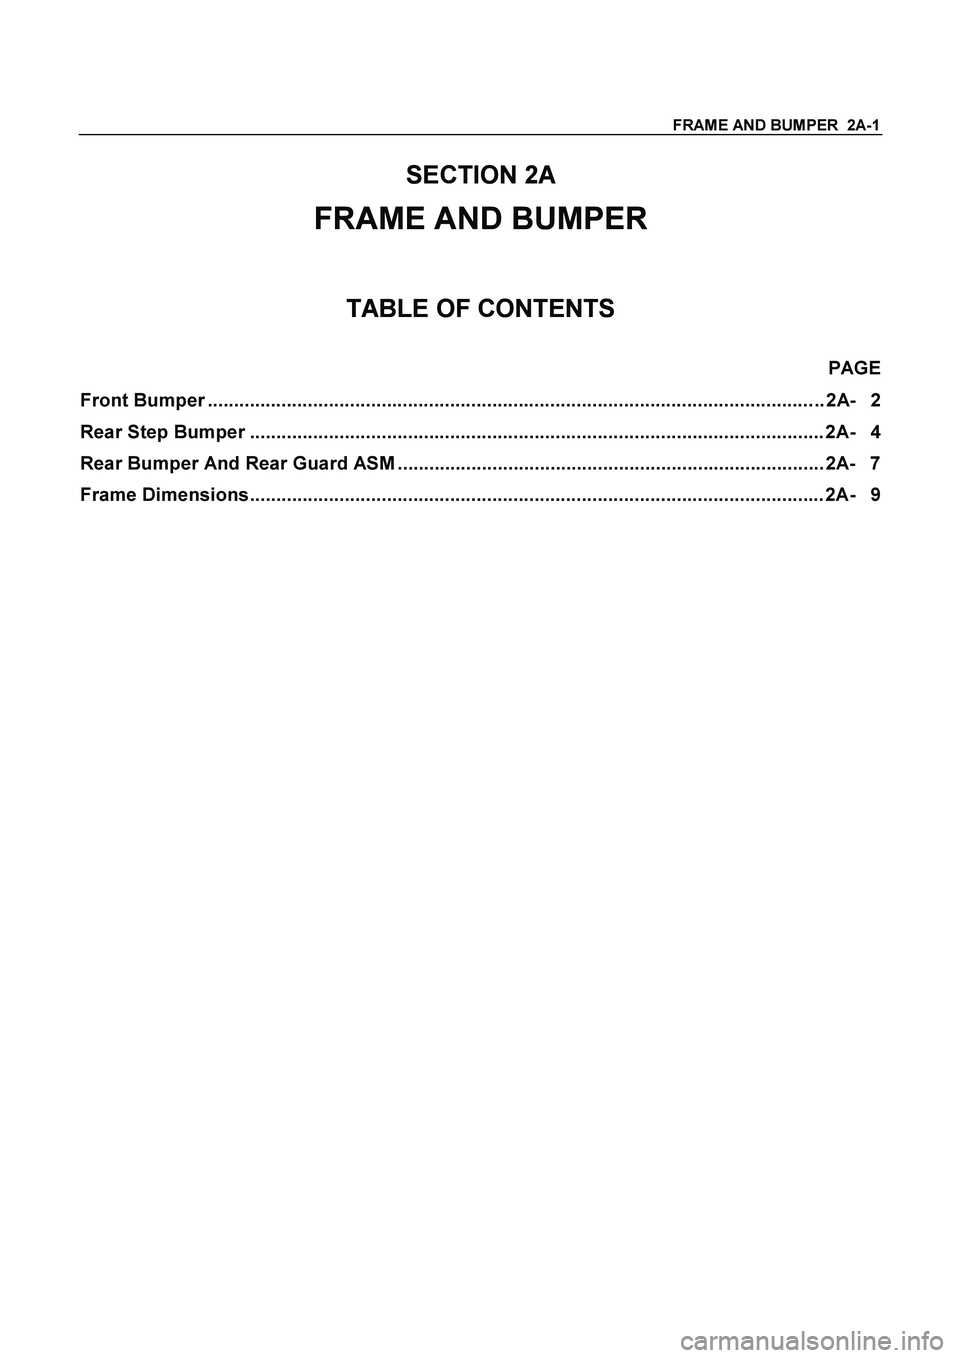 ISUZU TF SERIES 2004  Workshop Manual FRAME AND BUMPER  2A-1
 
SECTION 2A 
FRAME AND BUMPER 
TABLE OF CONTENTS 
 PAGE 
Front Bumper ..........................................................................................................